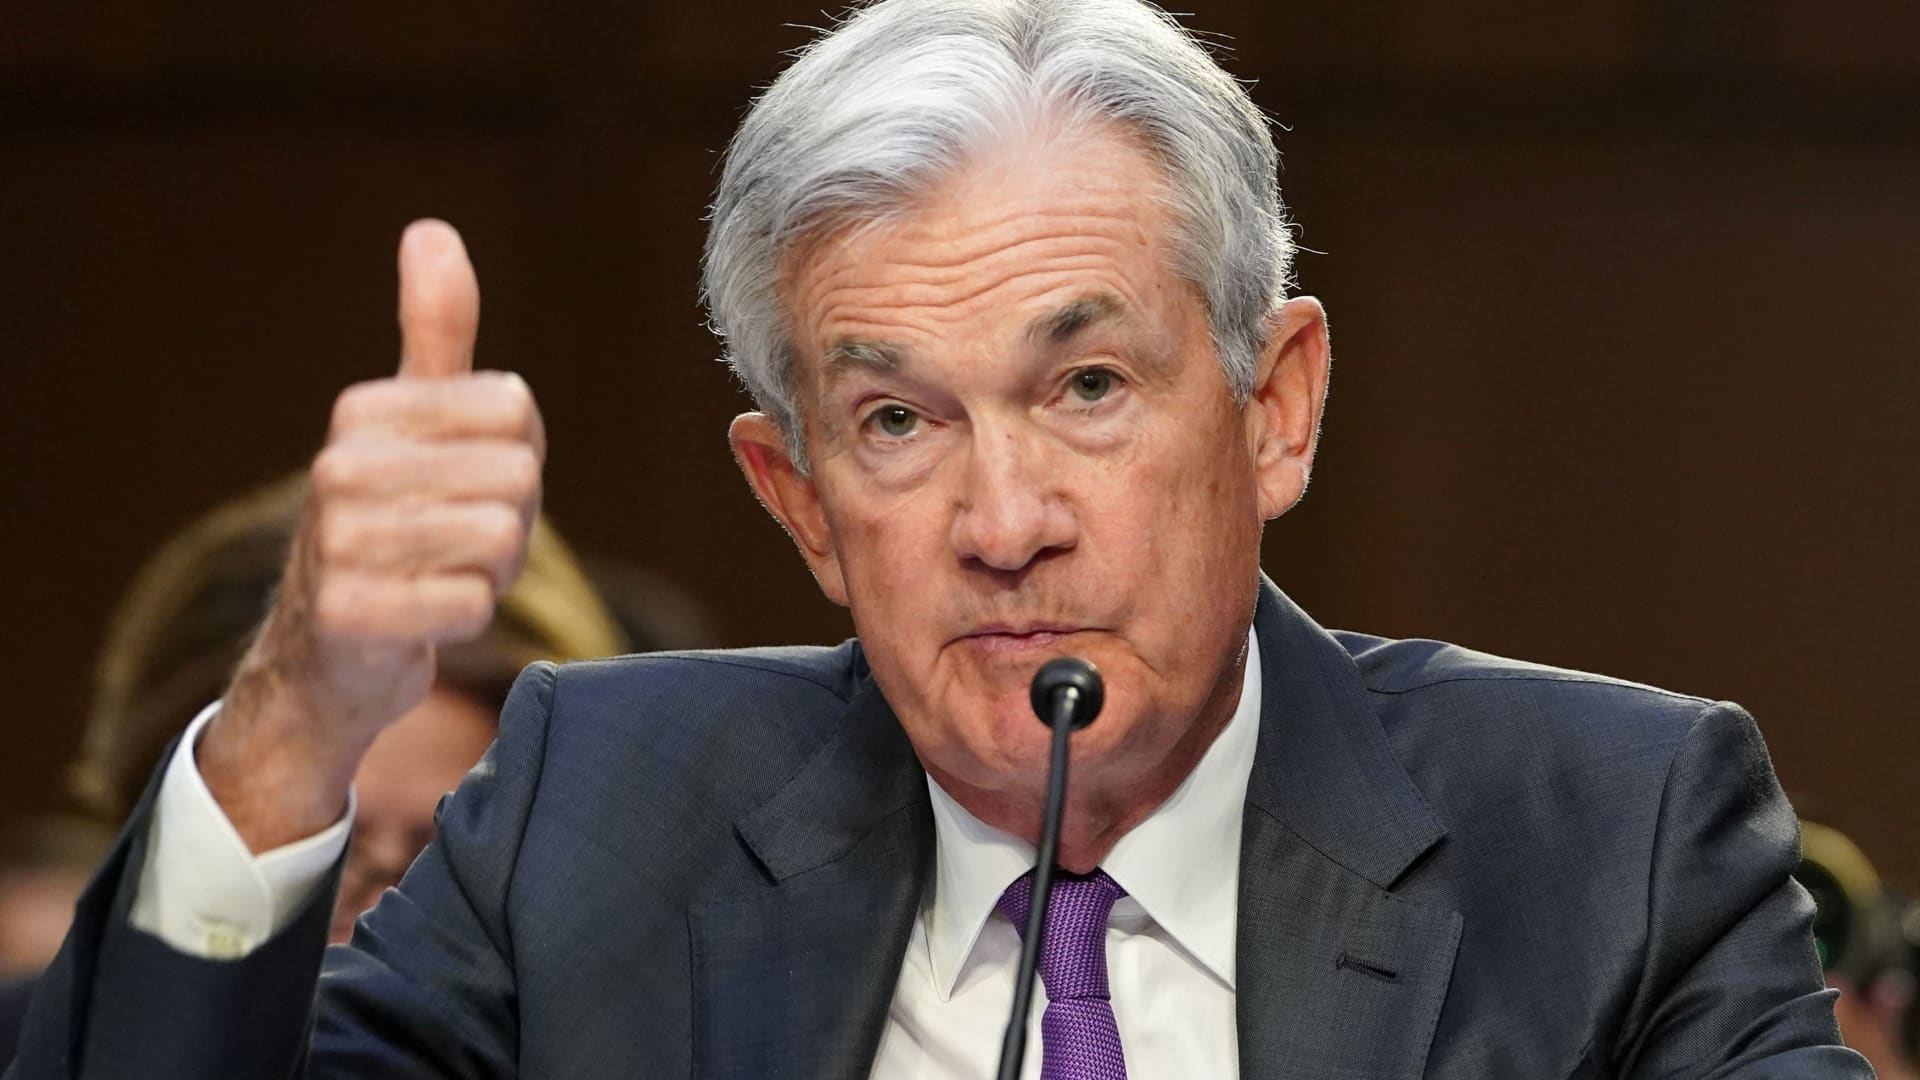 Why the Federal Reserve May Raise Interest Rates Again: A closer look at the current economic climate